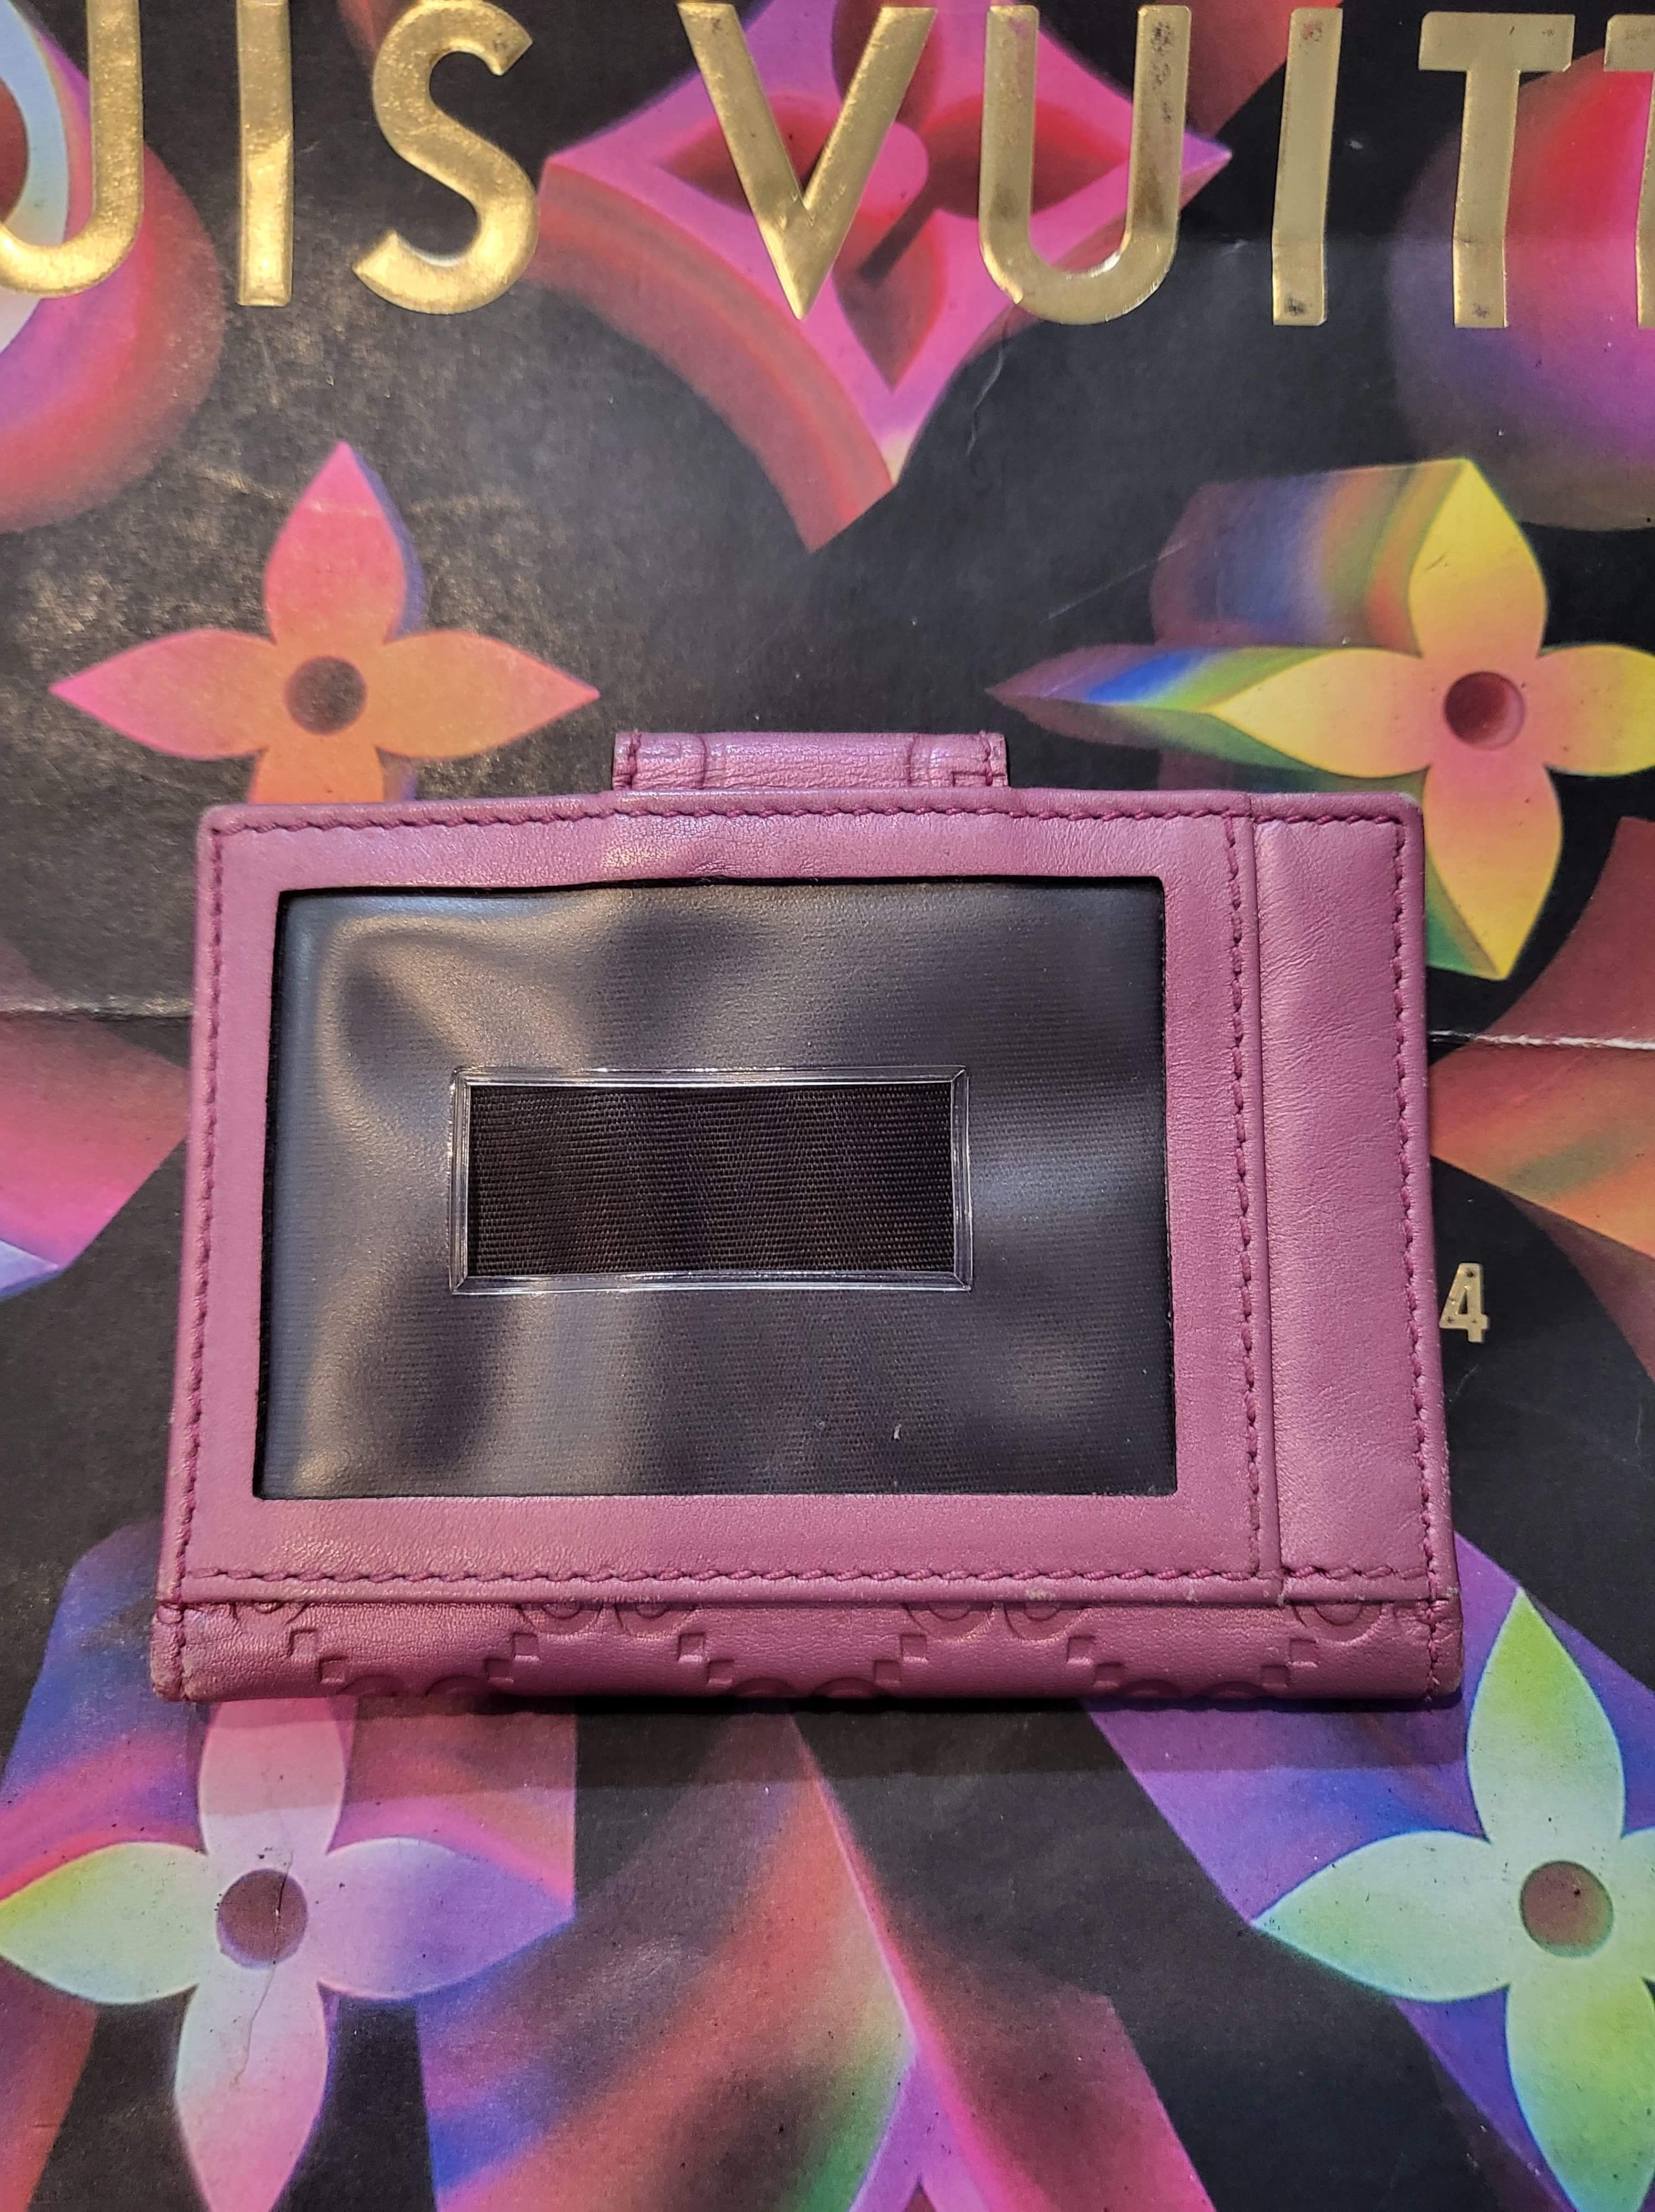 100% Authentic GUCCI Garden Purple Wallet with Gold Rose from Florence,  Italy!